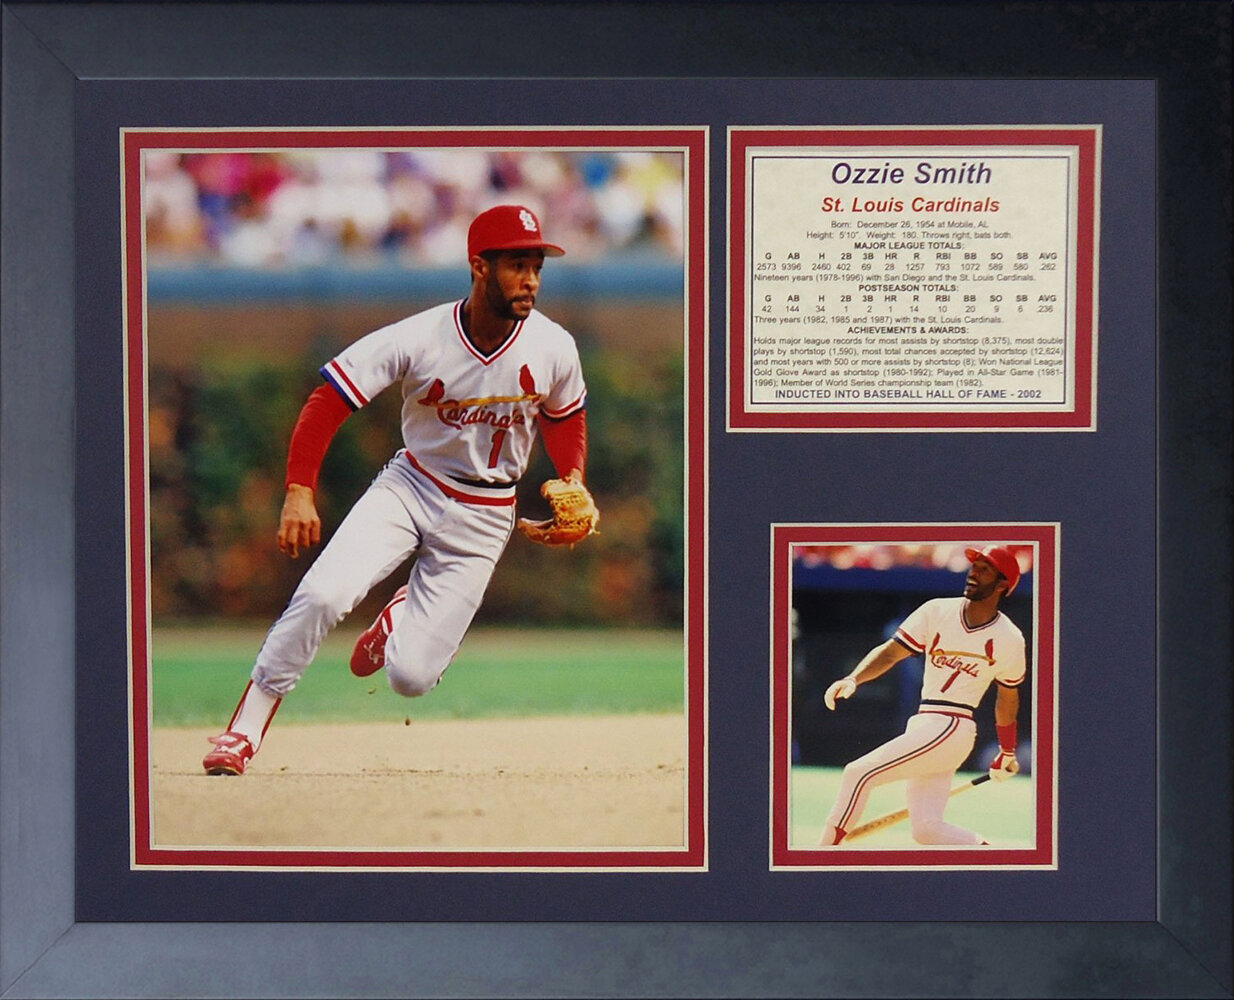 Ozzie Smith on X: To quote one of the greatest baseball players